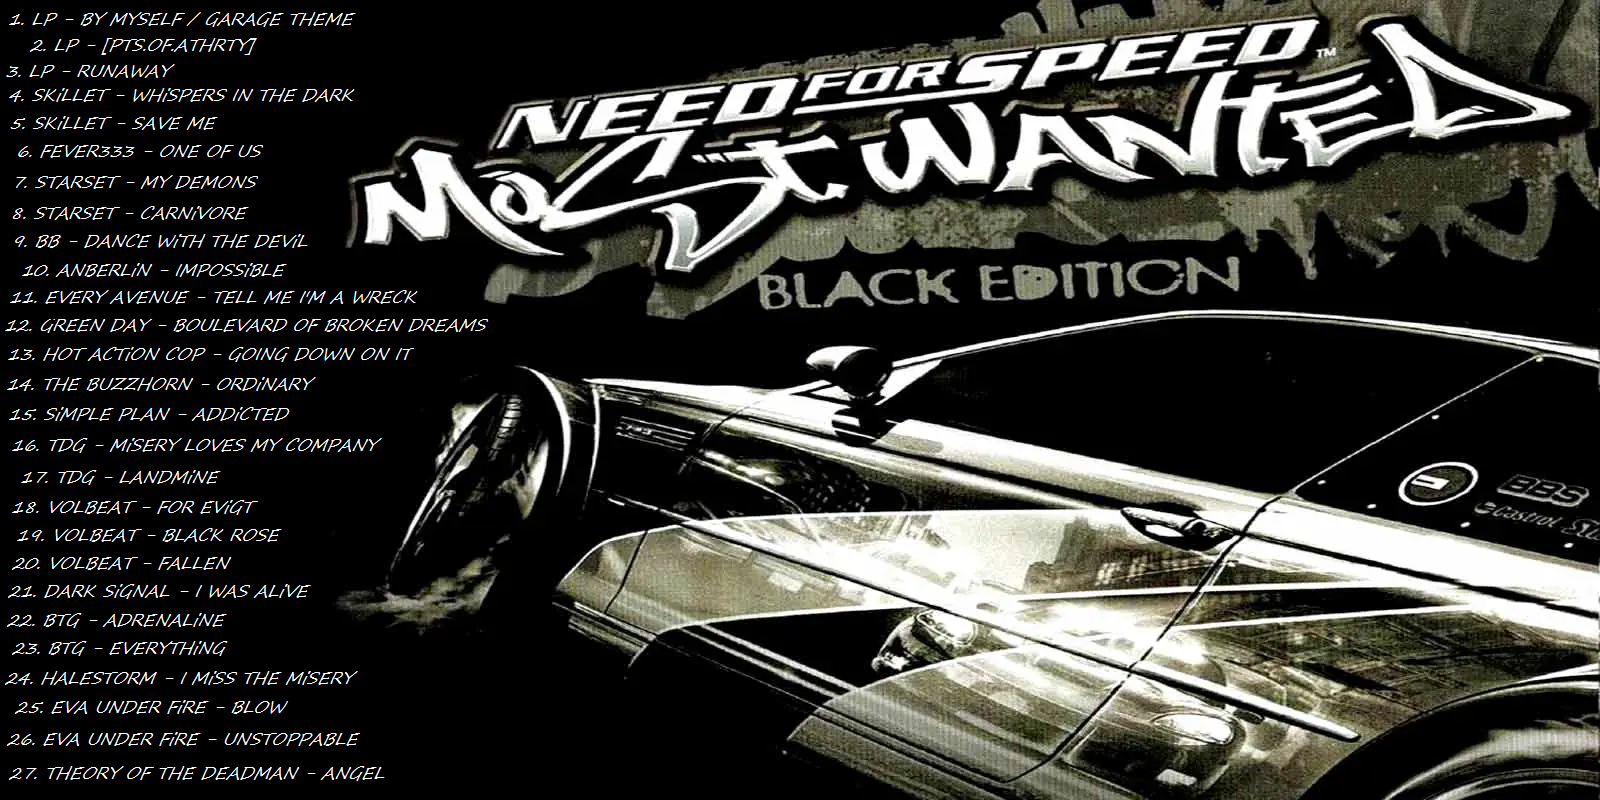 Nfs most soundtrack. NFS most wanted 2005 диск. Диск нид фор СПИД мост вантед 2005. Постер нфс мост вантед 2005. Need for Speed most wanted Black Edition диск.